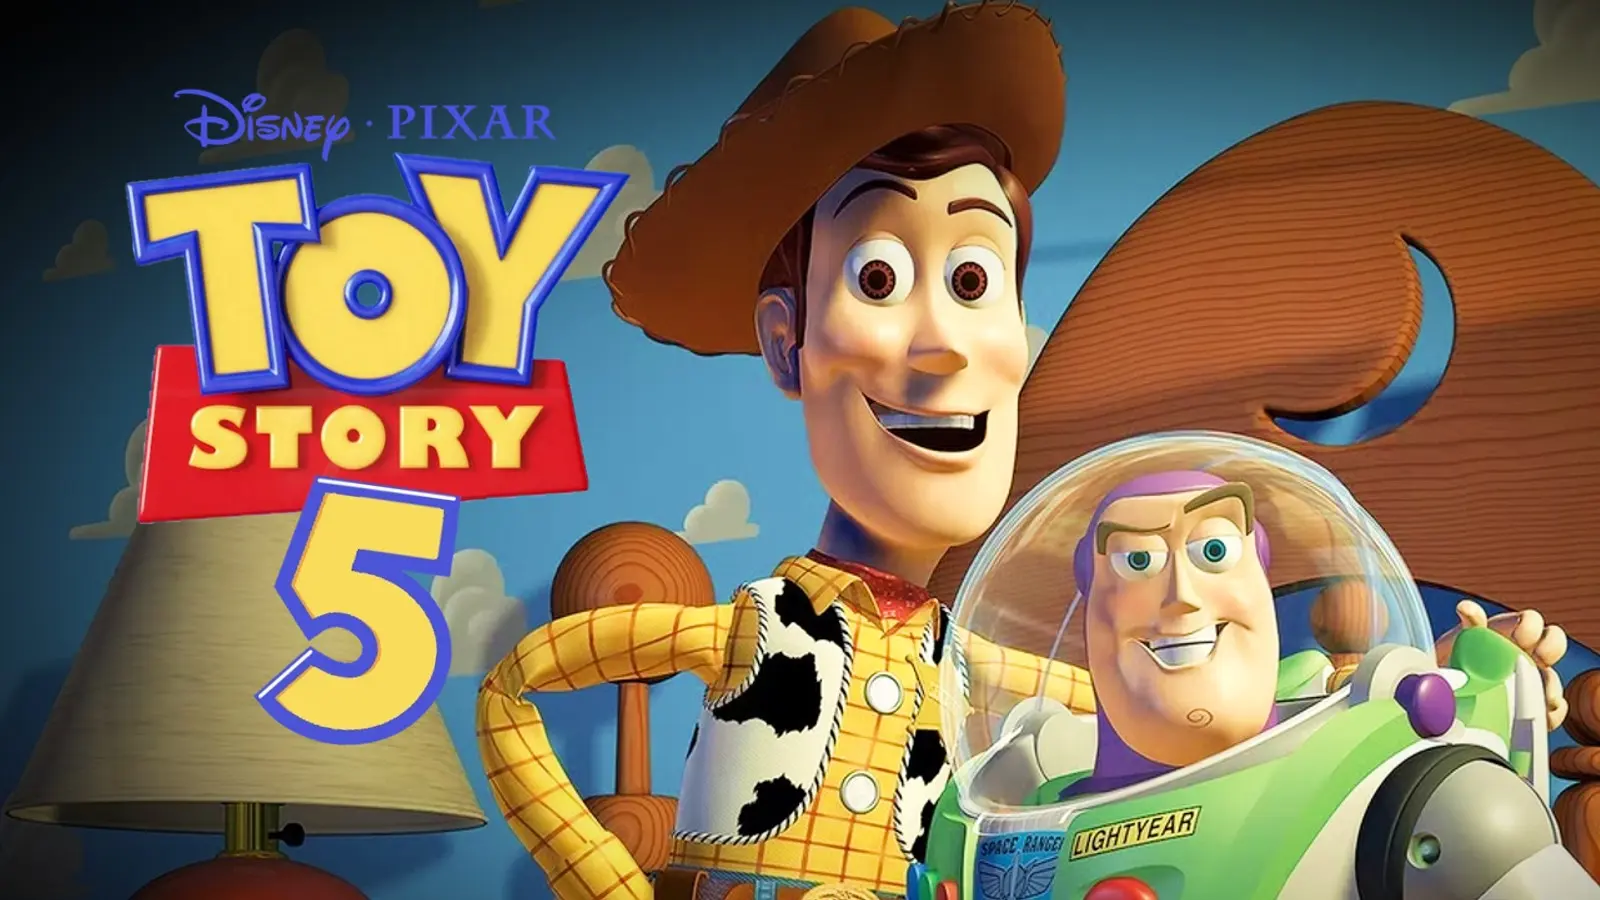 Toy Story 5 Buzz and Woody's Epic Return - Tim Allen Teases Exciting Developments2